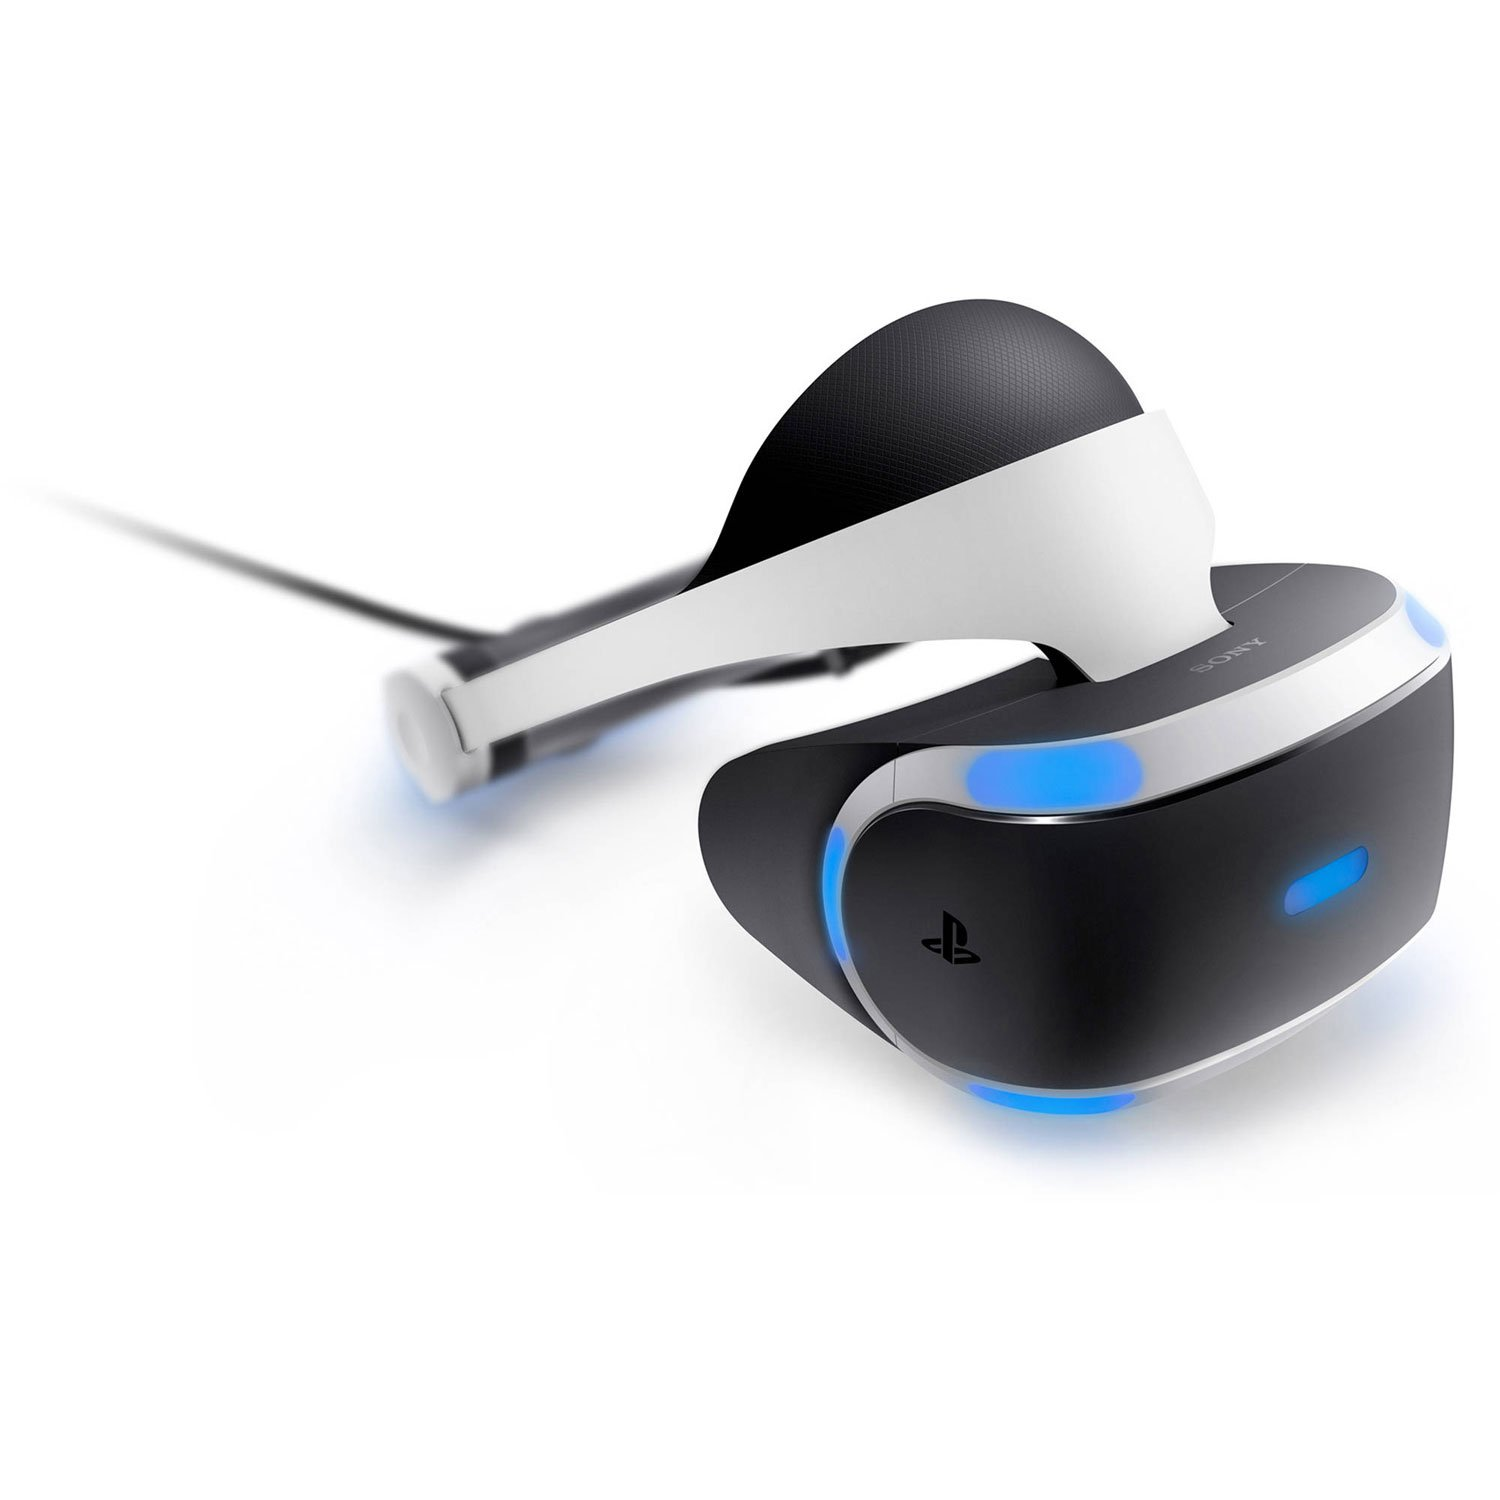 An Overview of the PS VR Headset 